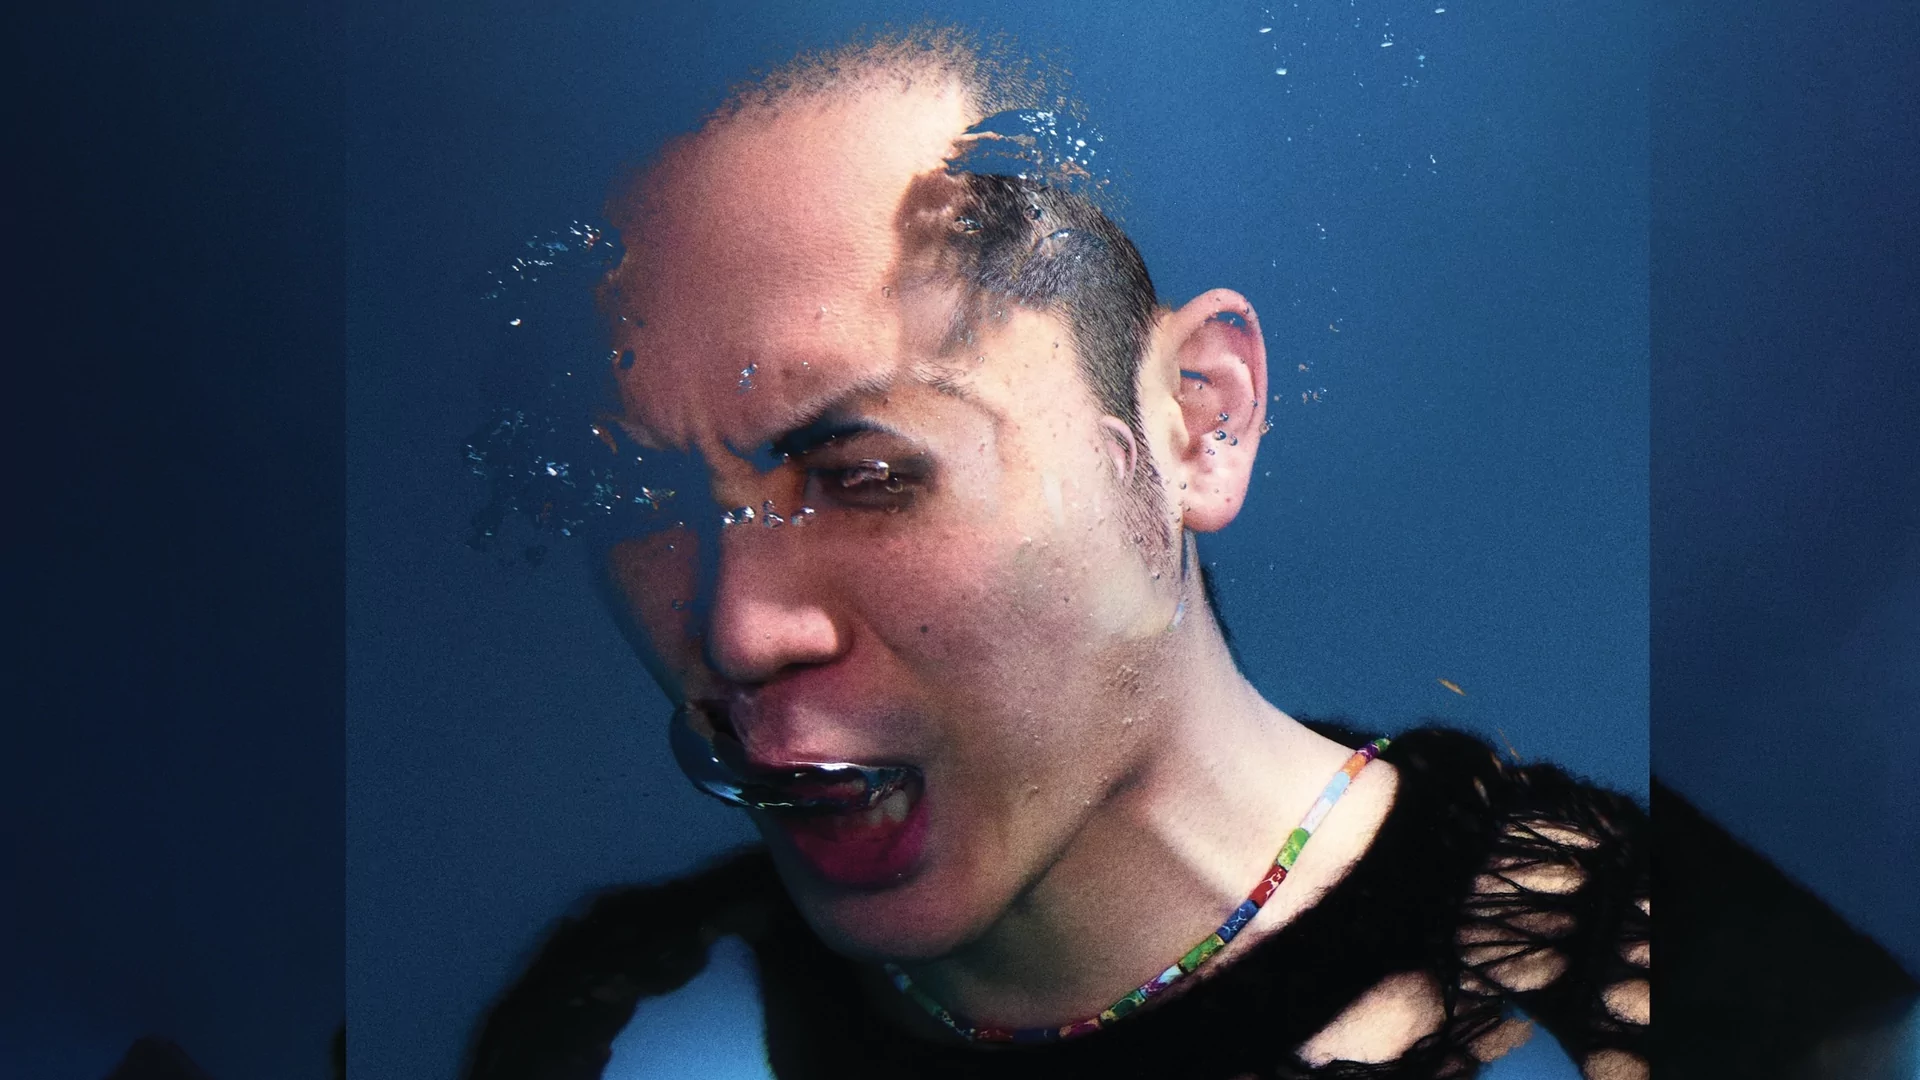 Photo of Tzusing wearing a black distressed jumper while breathing out bubbles underwater